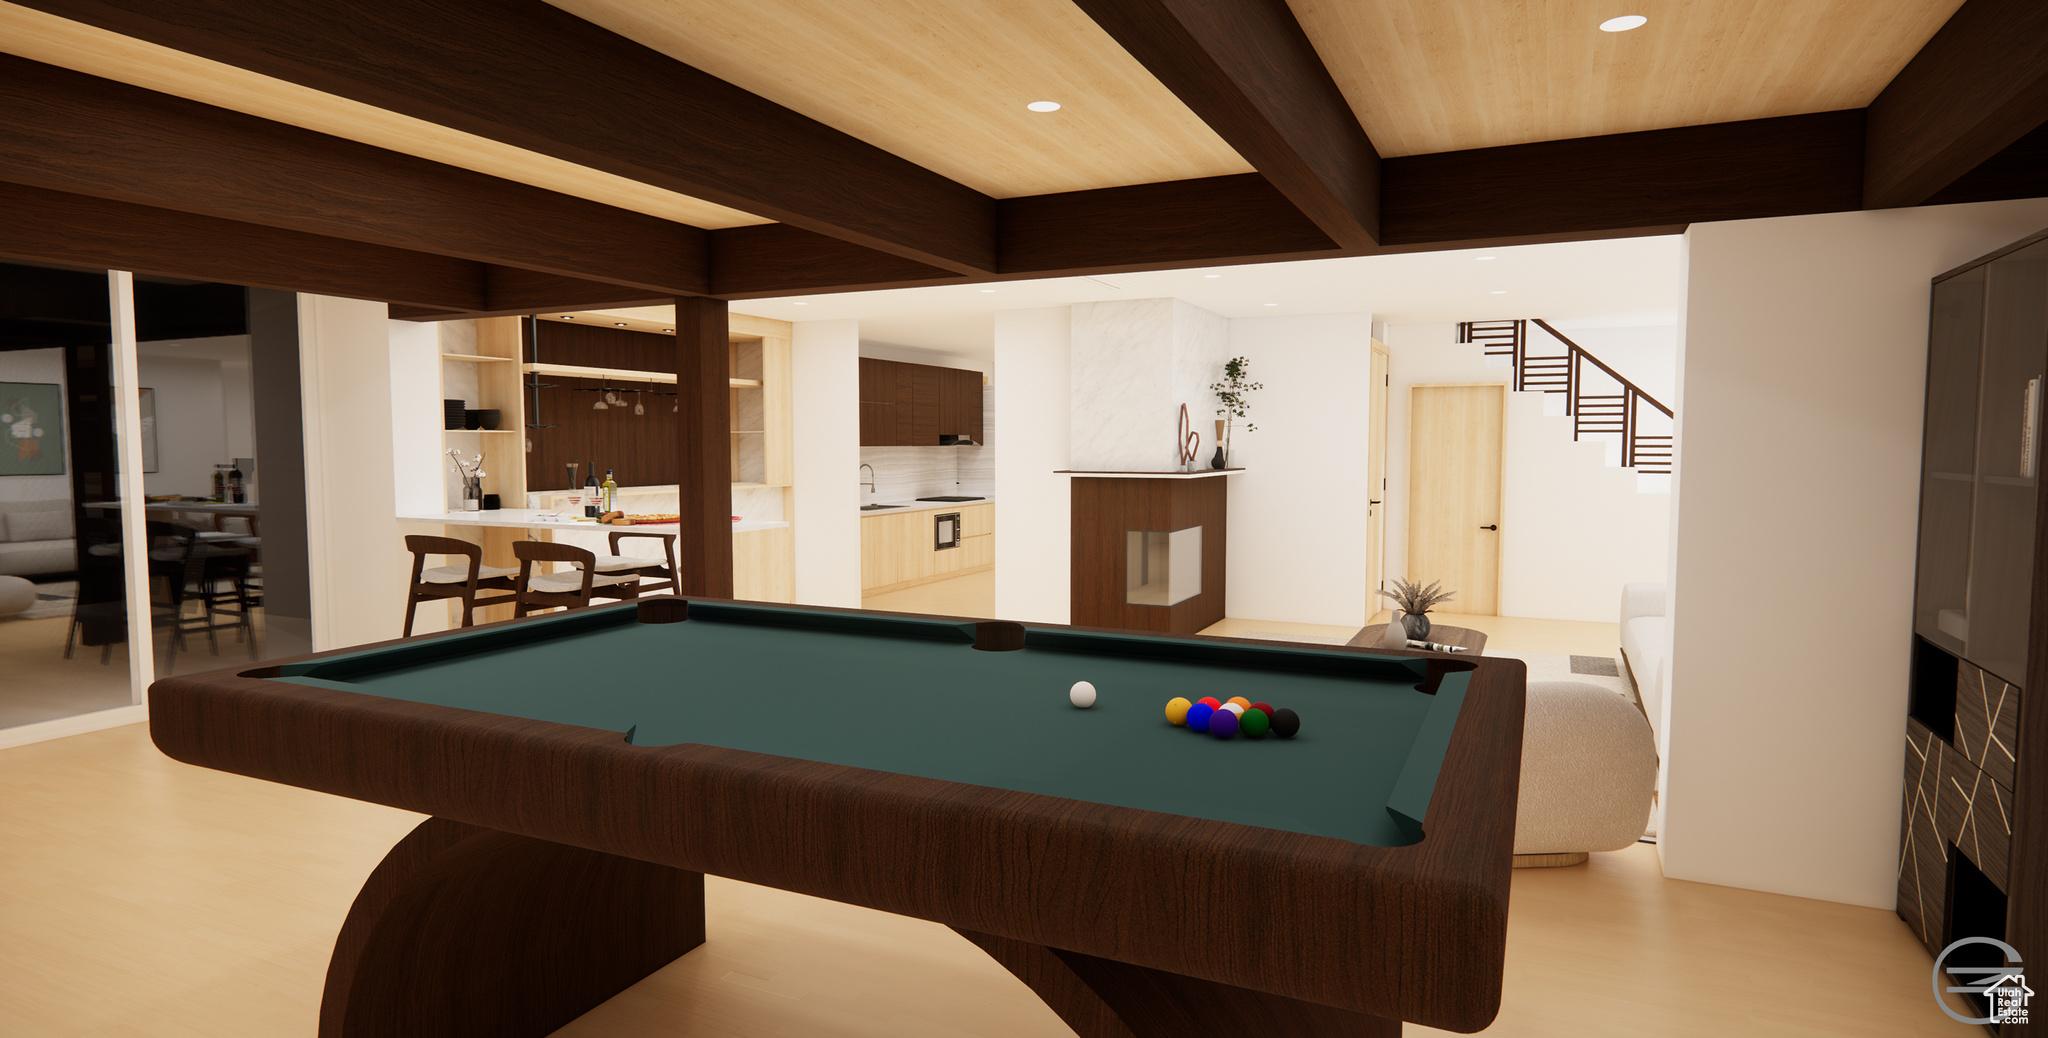 Basement great room with beam ceiling, pool table, light hardwood / wood-style floors, and wood ceiling - RENDERING